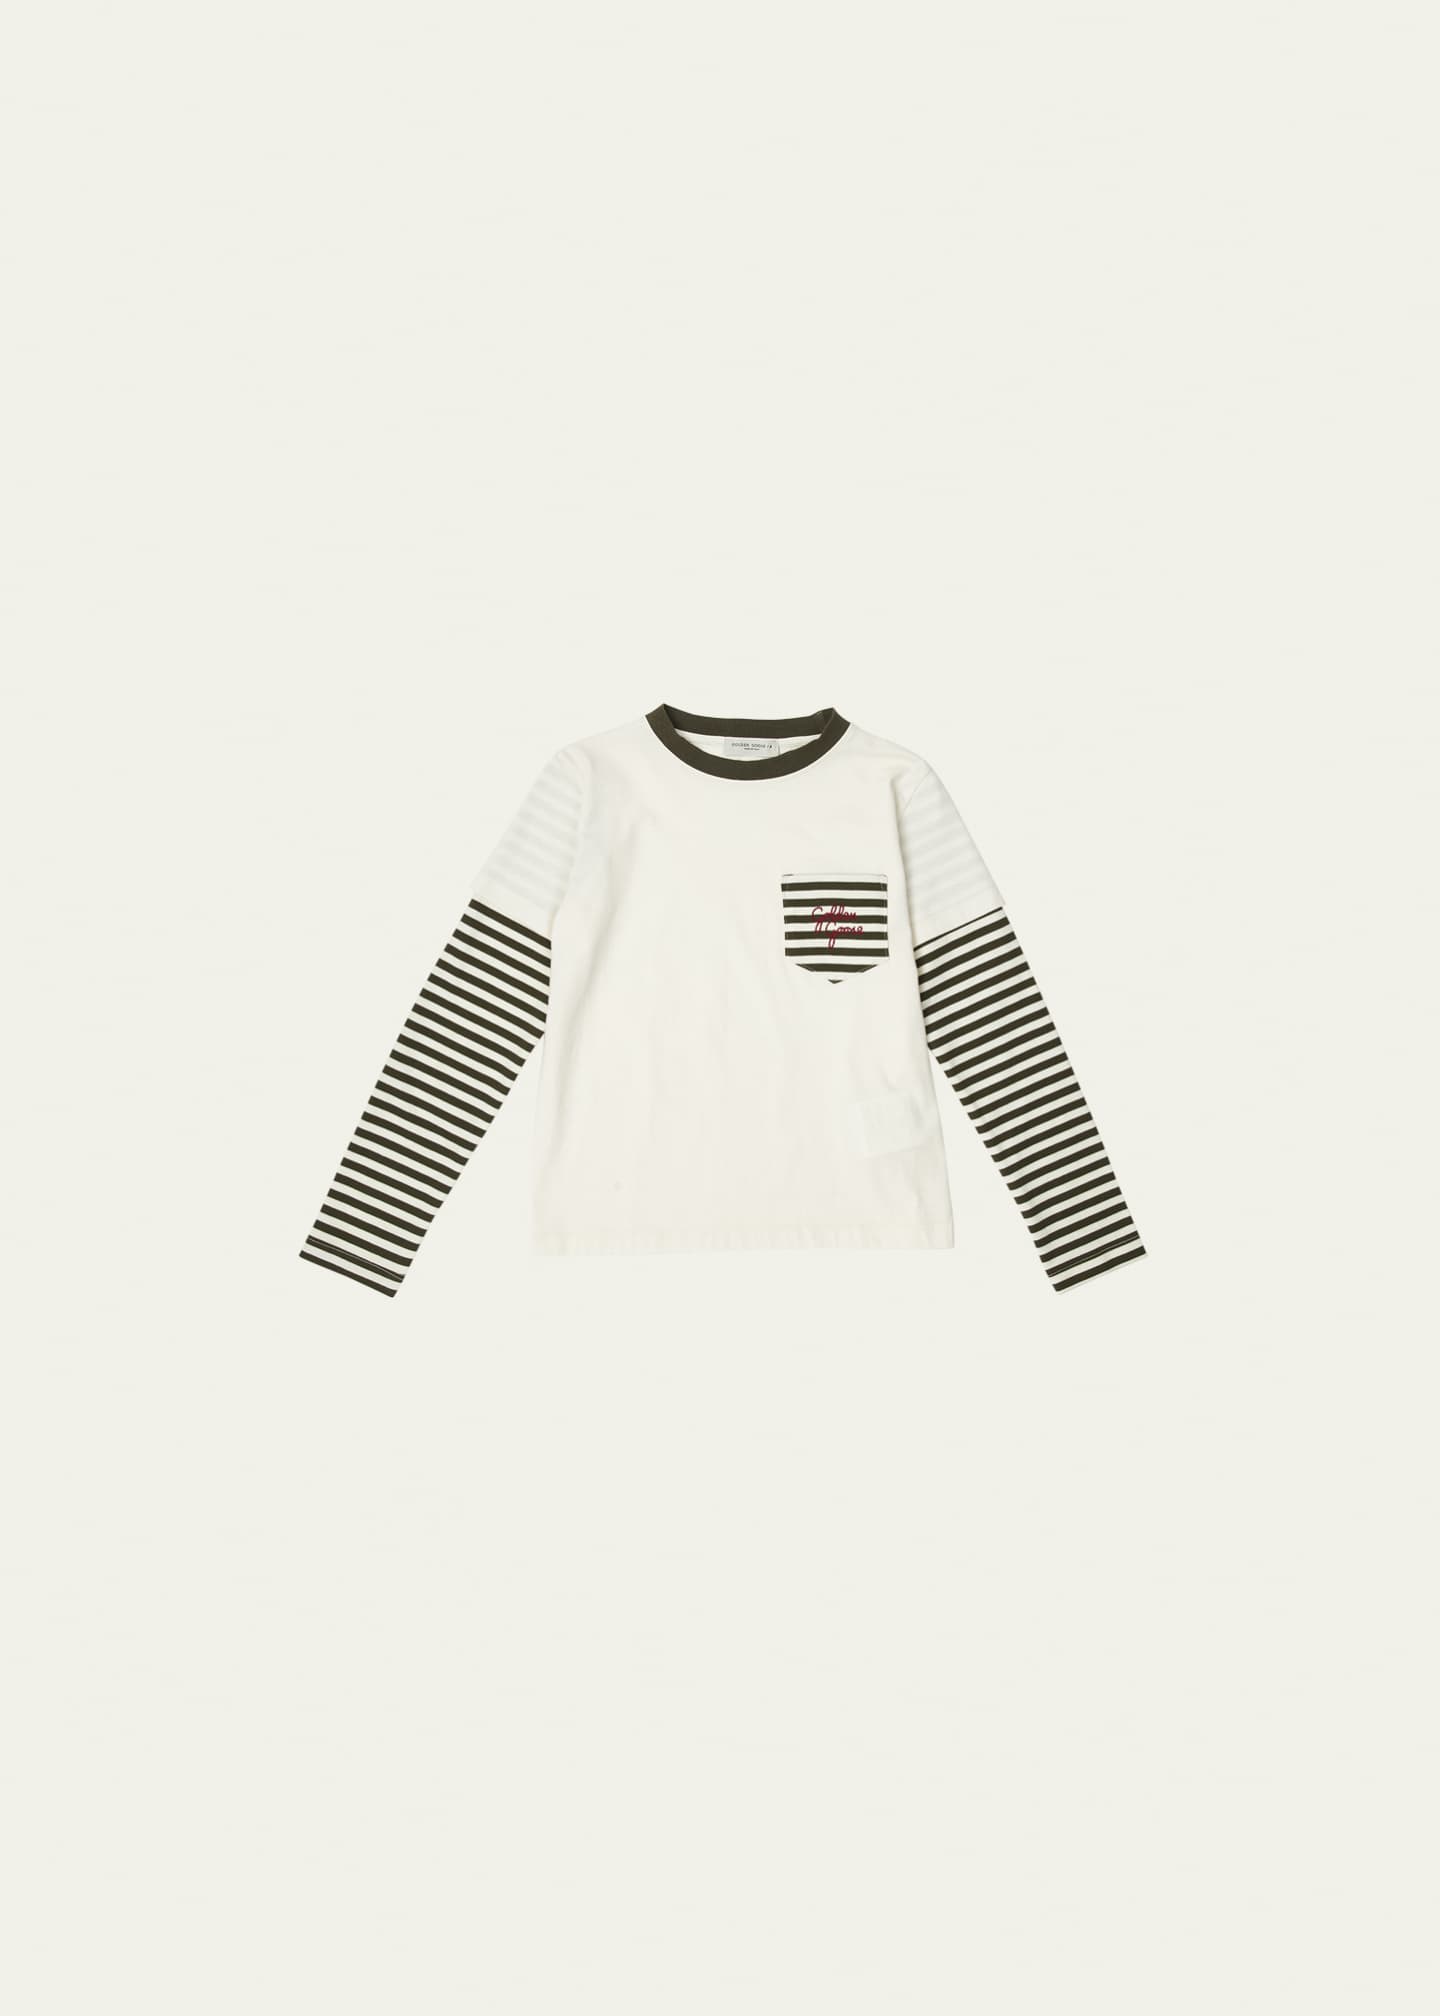 Golden Goose Boy's Journey Double Layered Striped T-Shirt, Size 12 ...